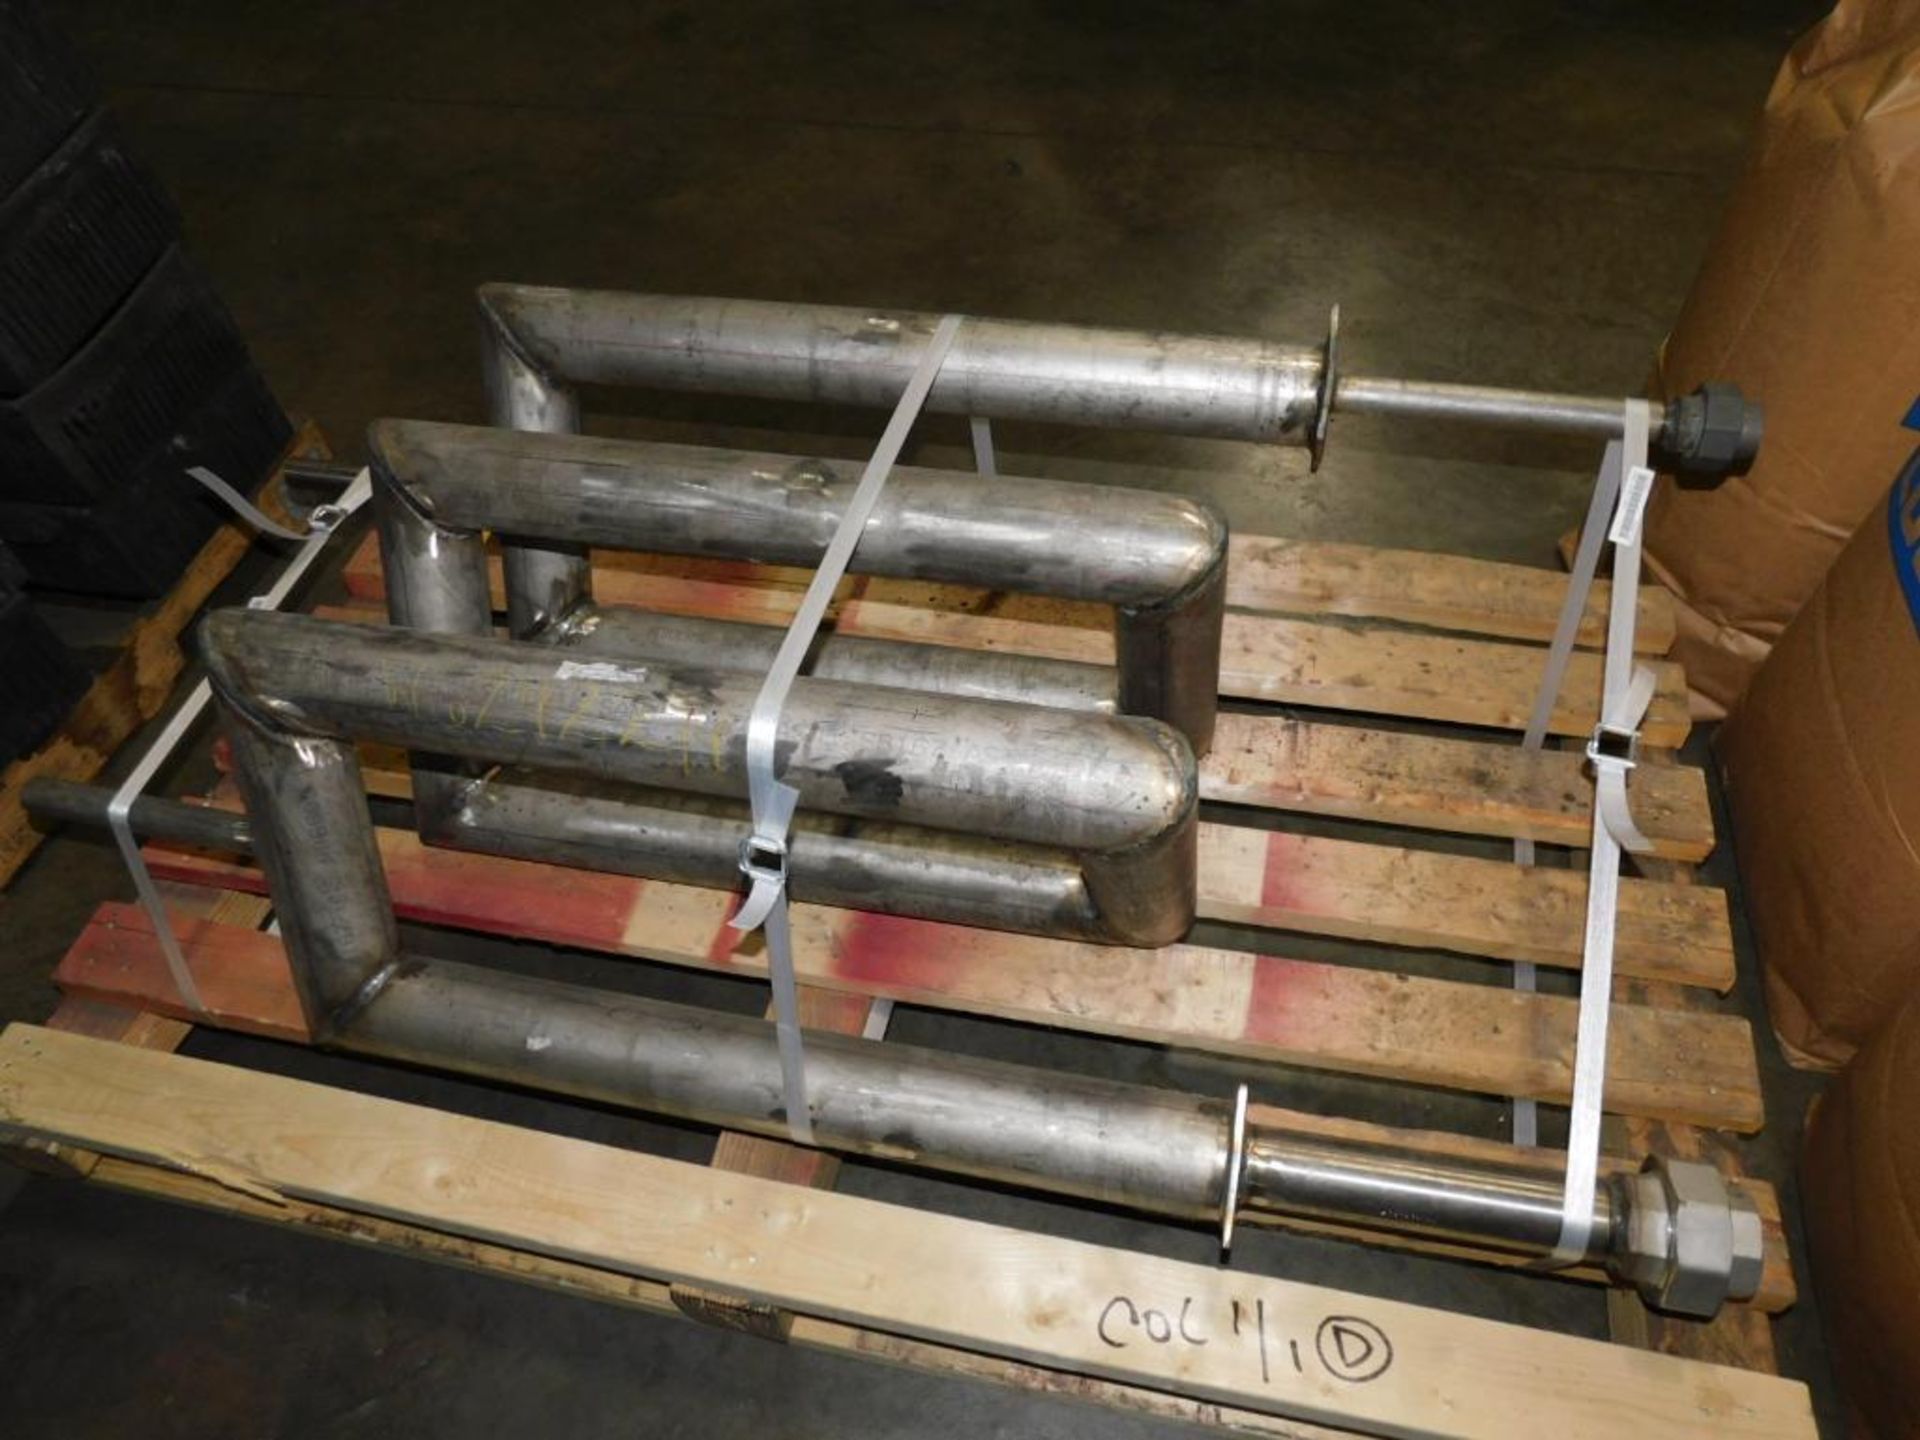 New Retort for CI Hayes Ammonia Dissociator described in Lot 12, Inconel Construction, Recently purc - Image 7 of 9